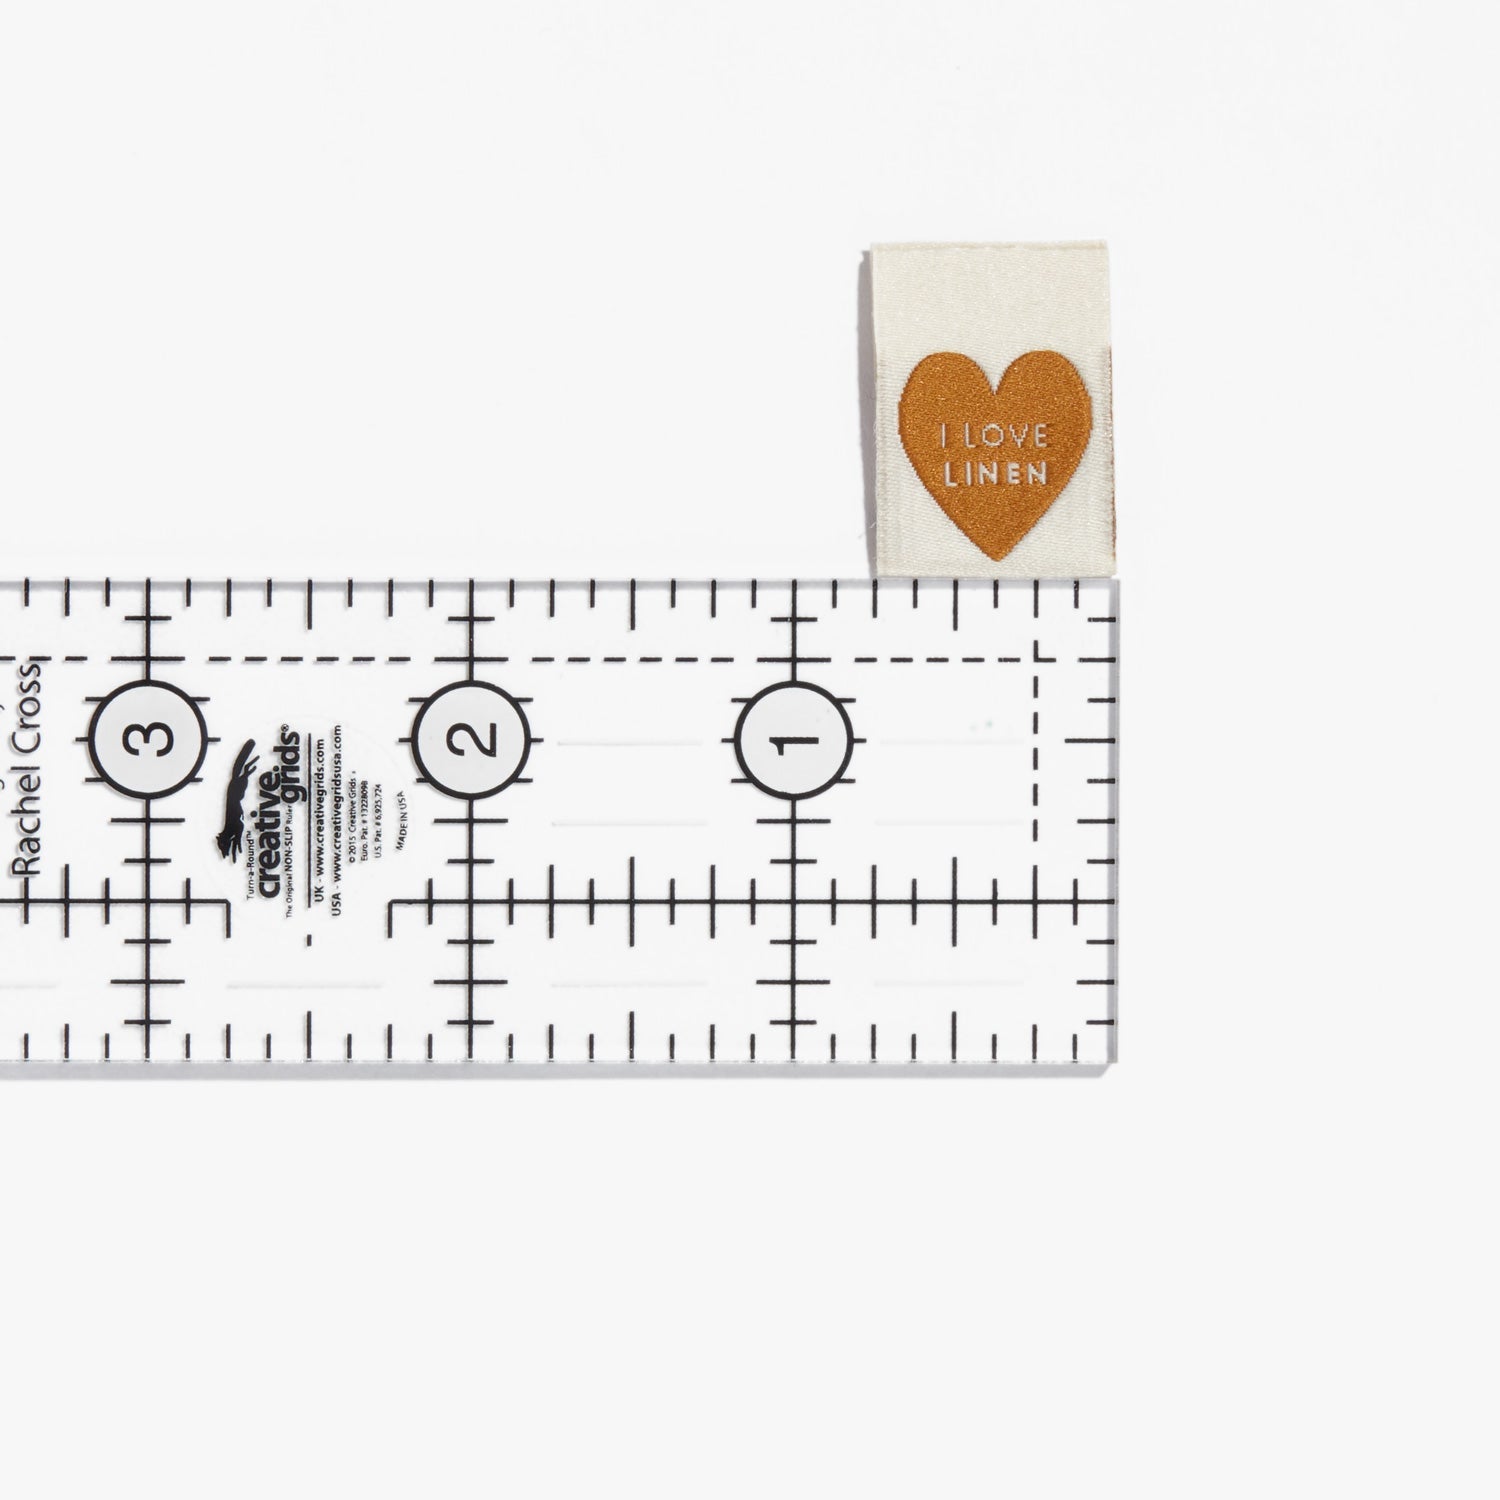 I Love Linen Pack of 8 Sewing Labels